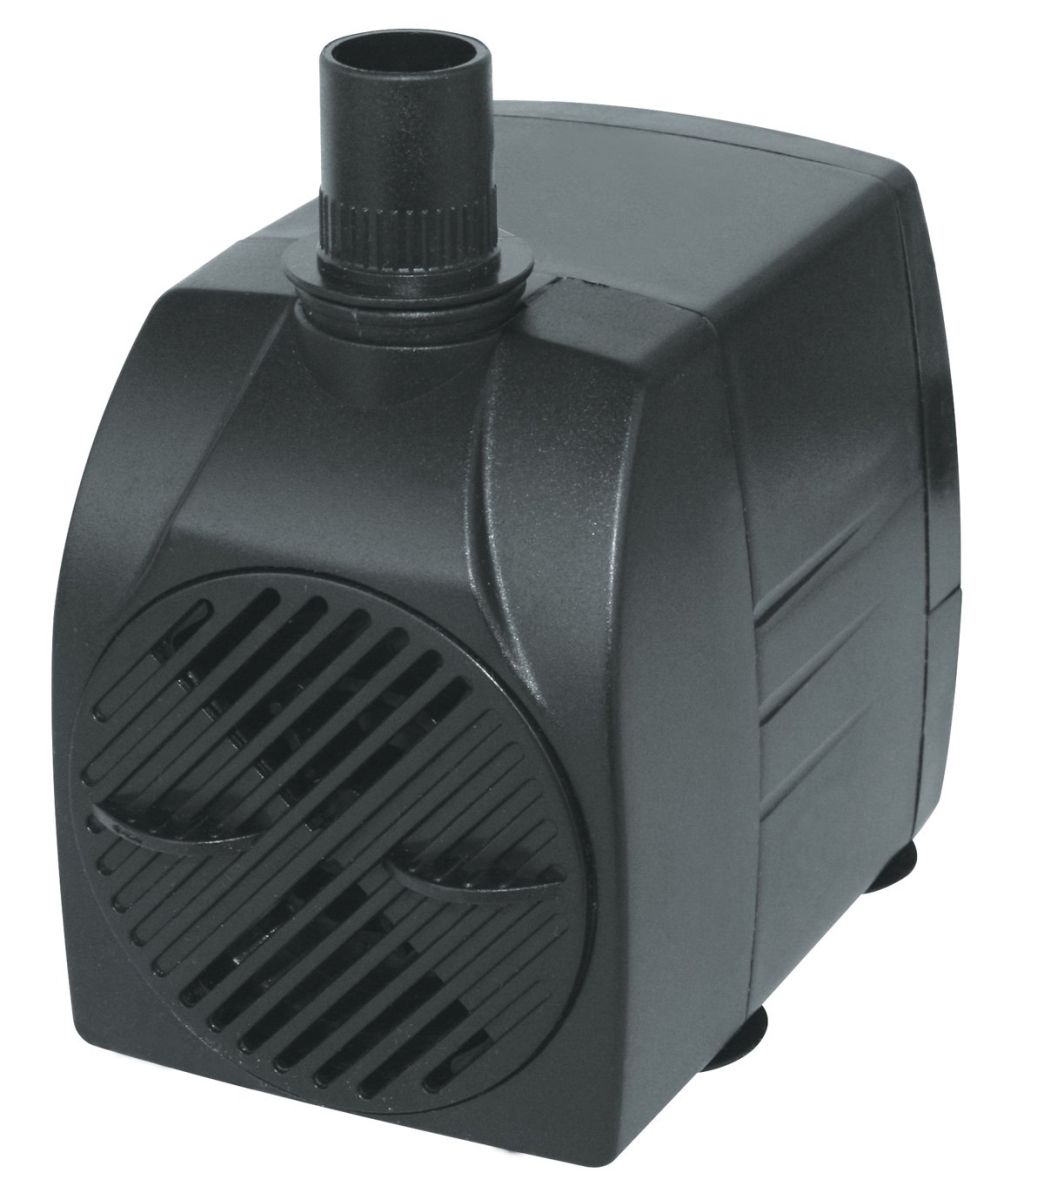 Su01735 Sp-530 530gph Statuary Pump & 15 Ft. Card With 0.5 X 0.625 X 0.75 In. Barb